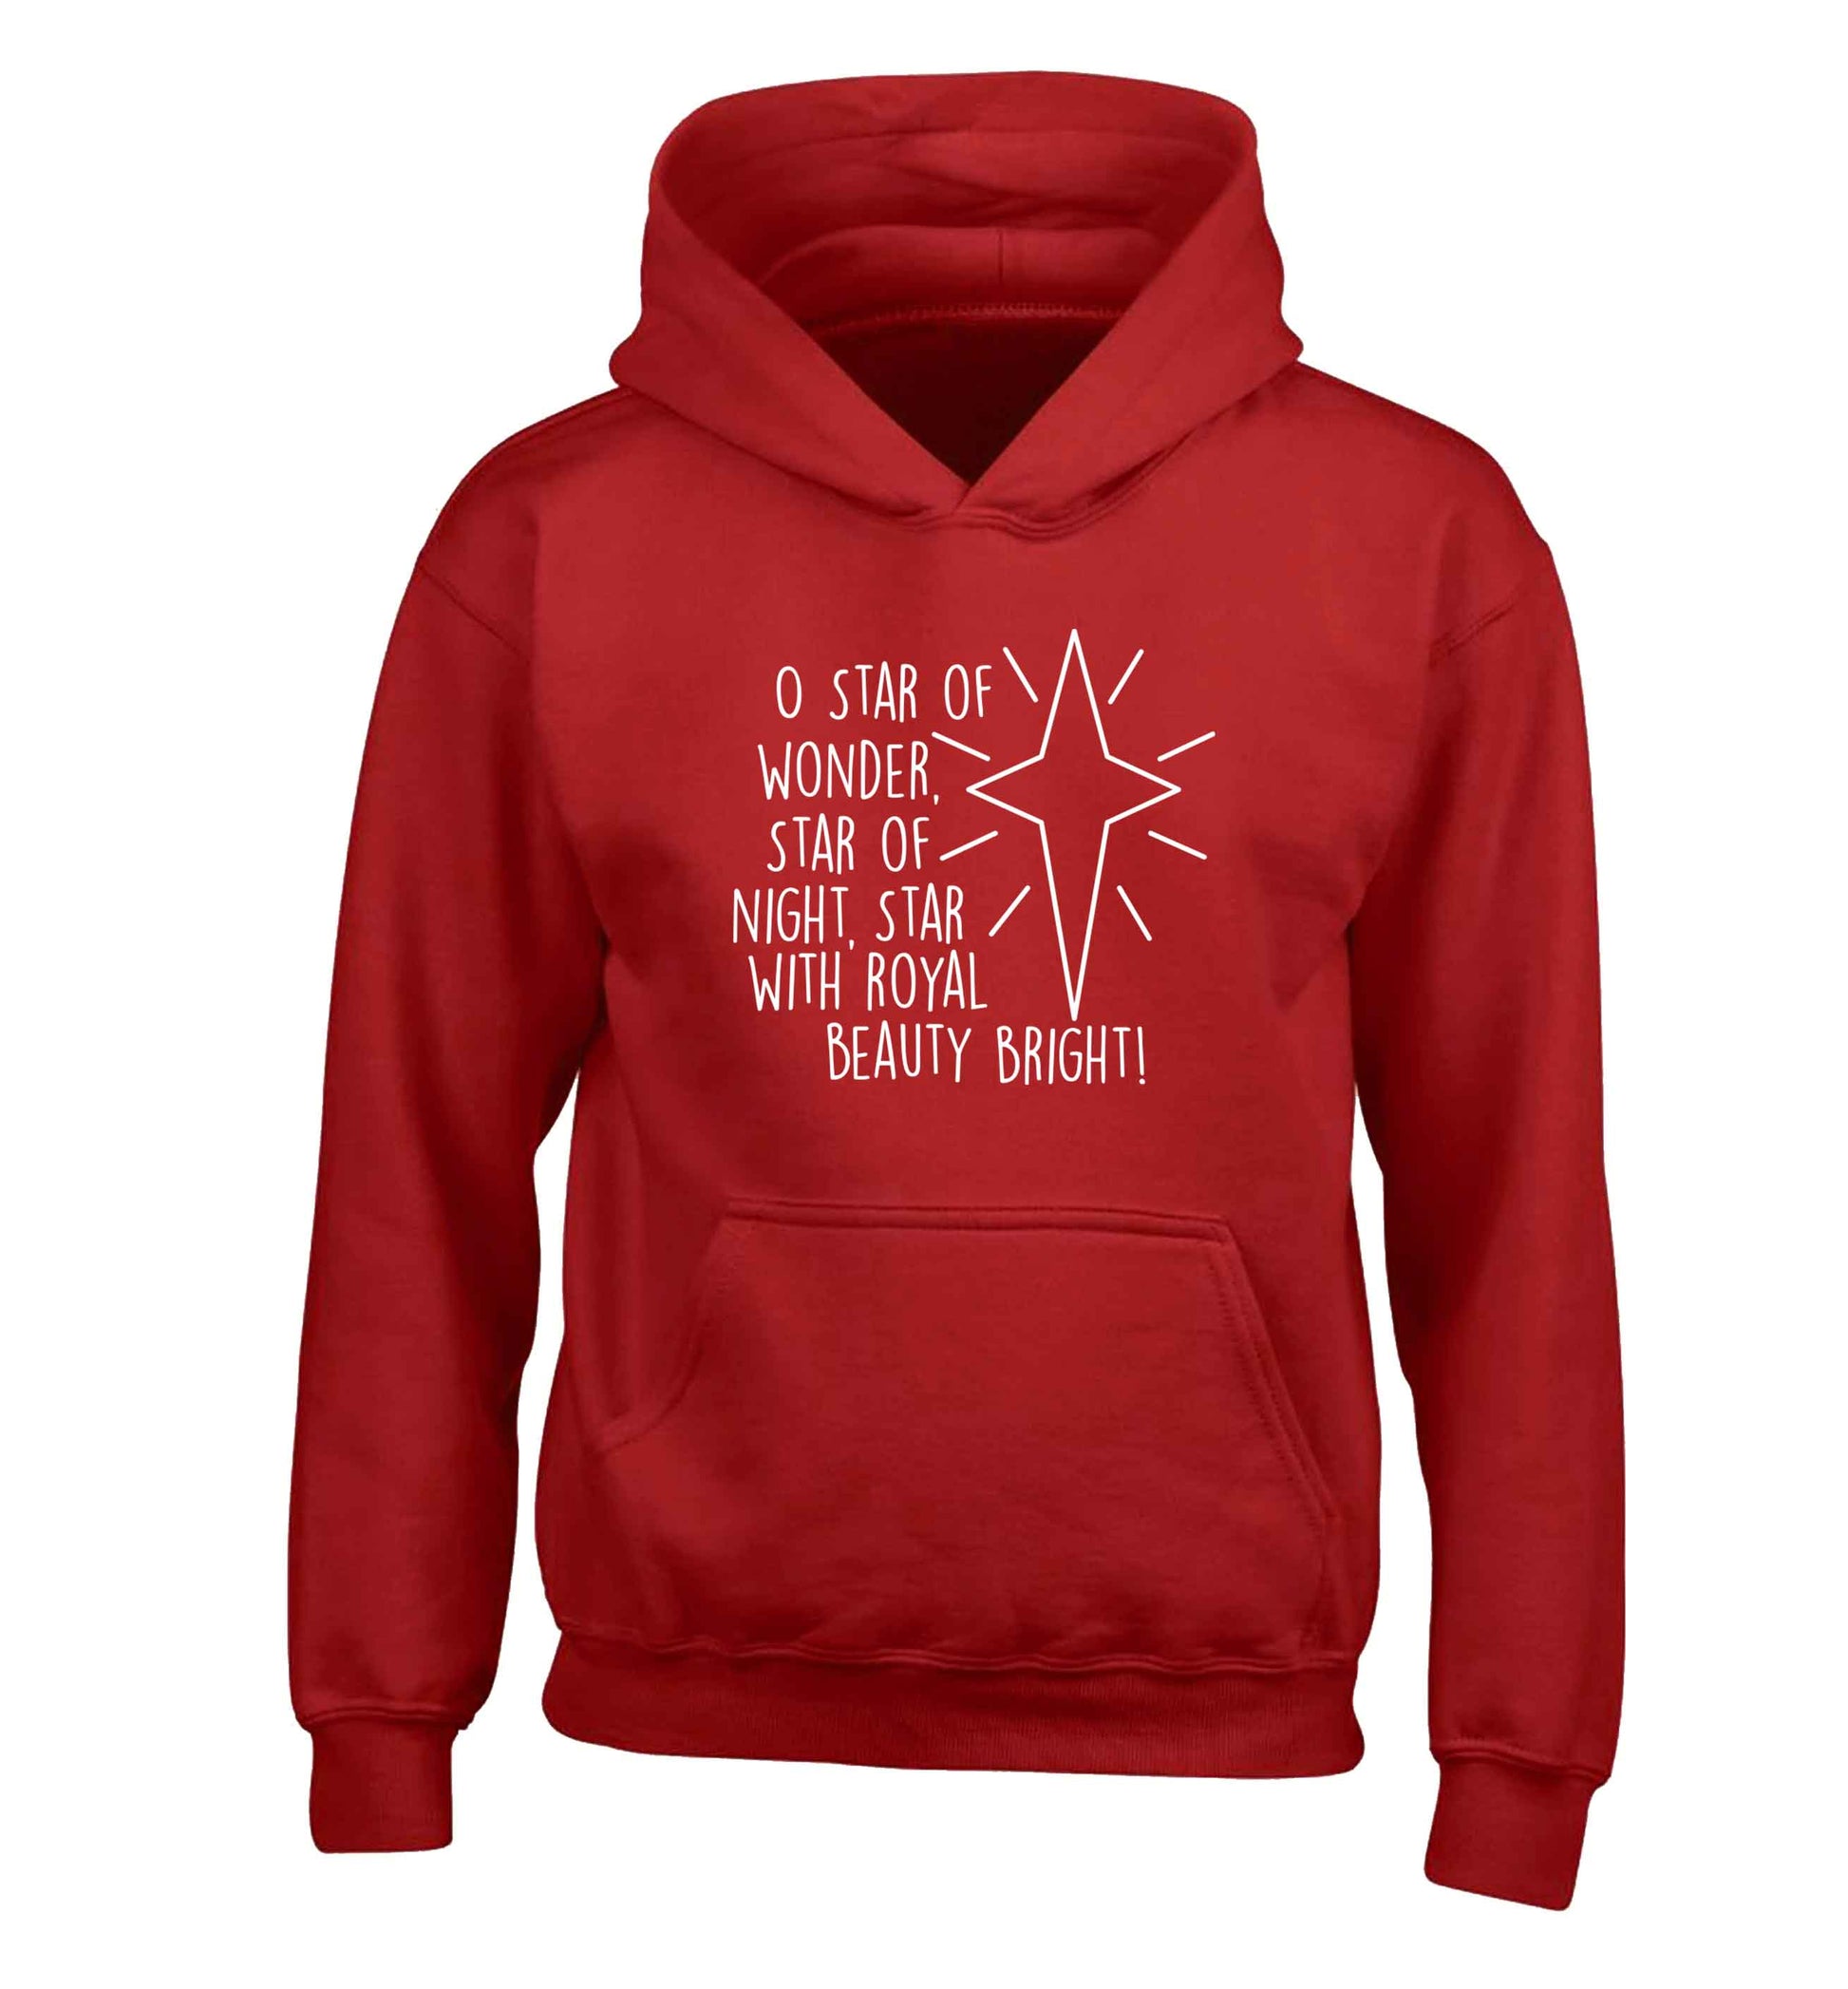 Oh star of wonder star of night, star with royal beauty bright children's red hoodie 12-13 Years